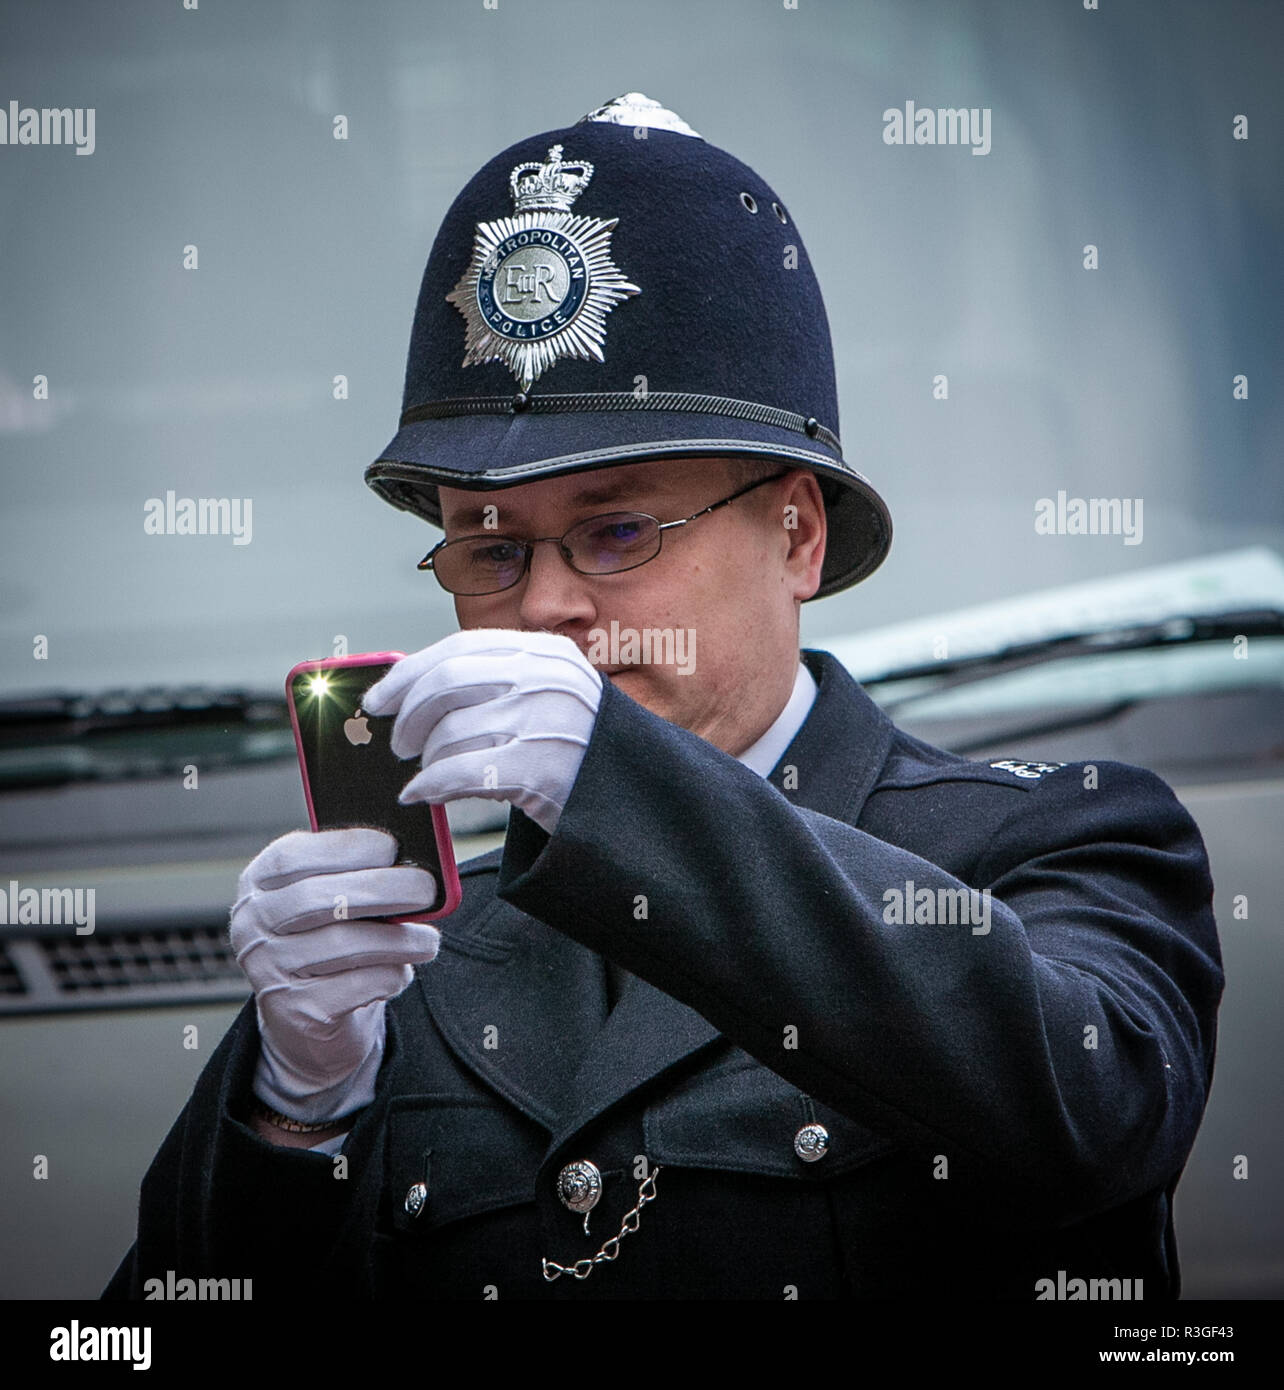 A London Policeman taking a photo with his mobile phone Stock Photo